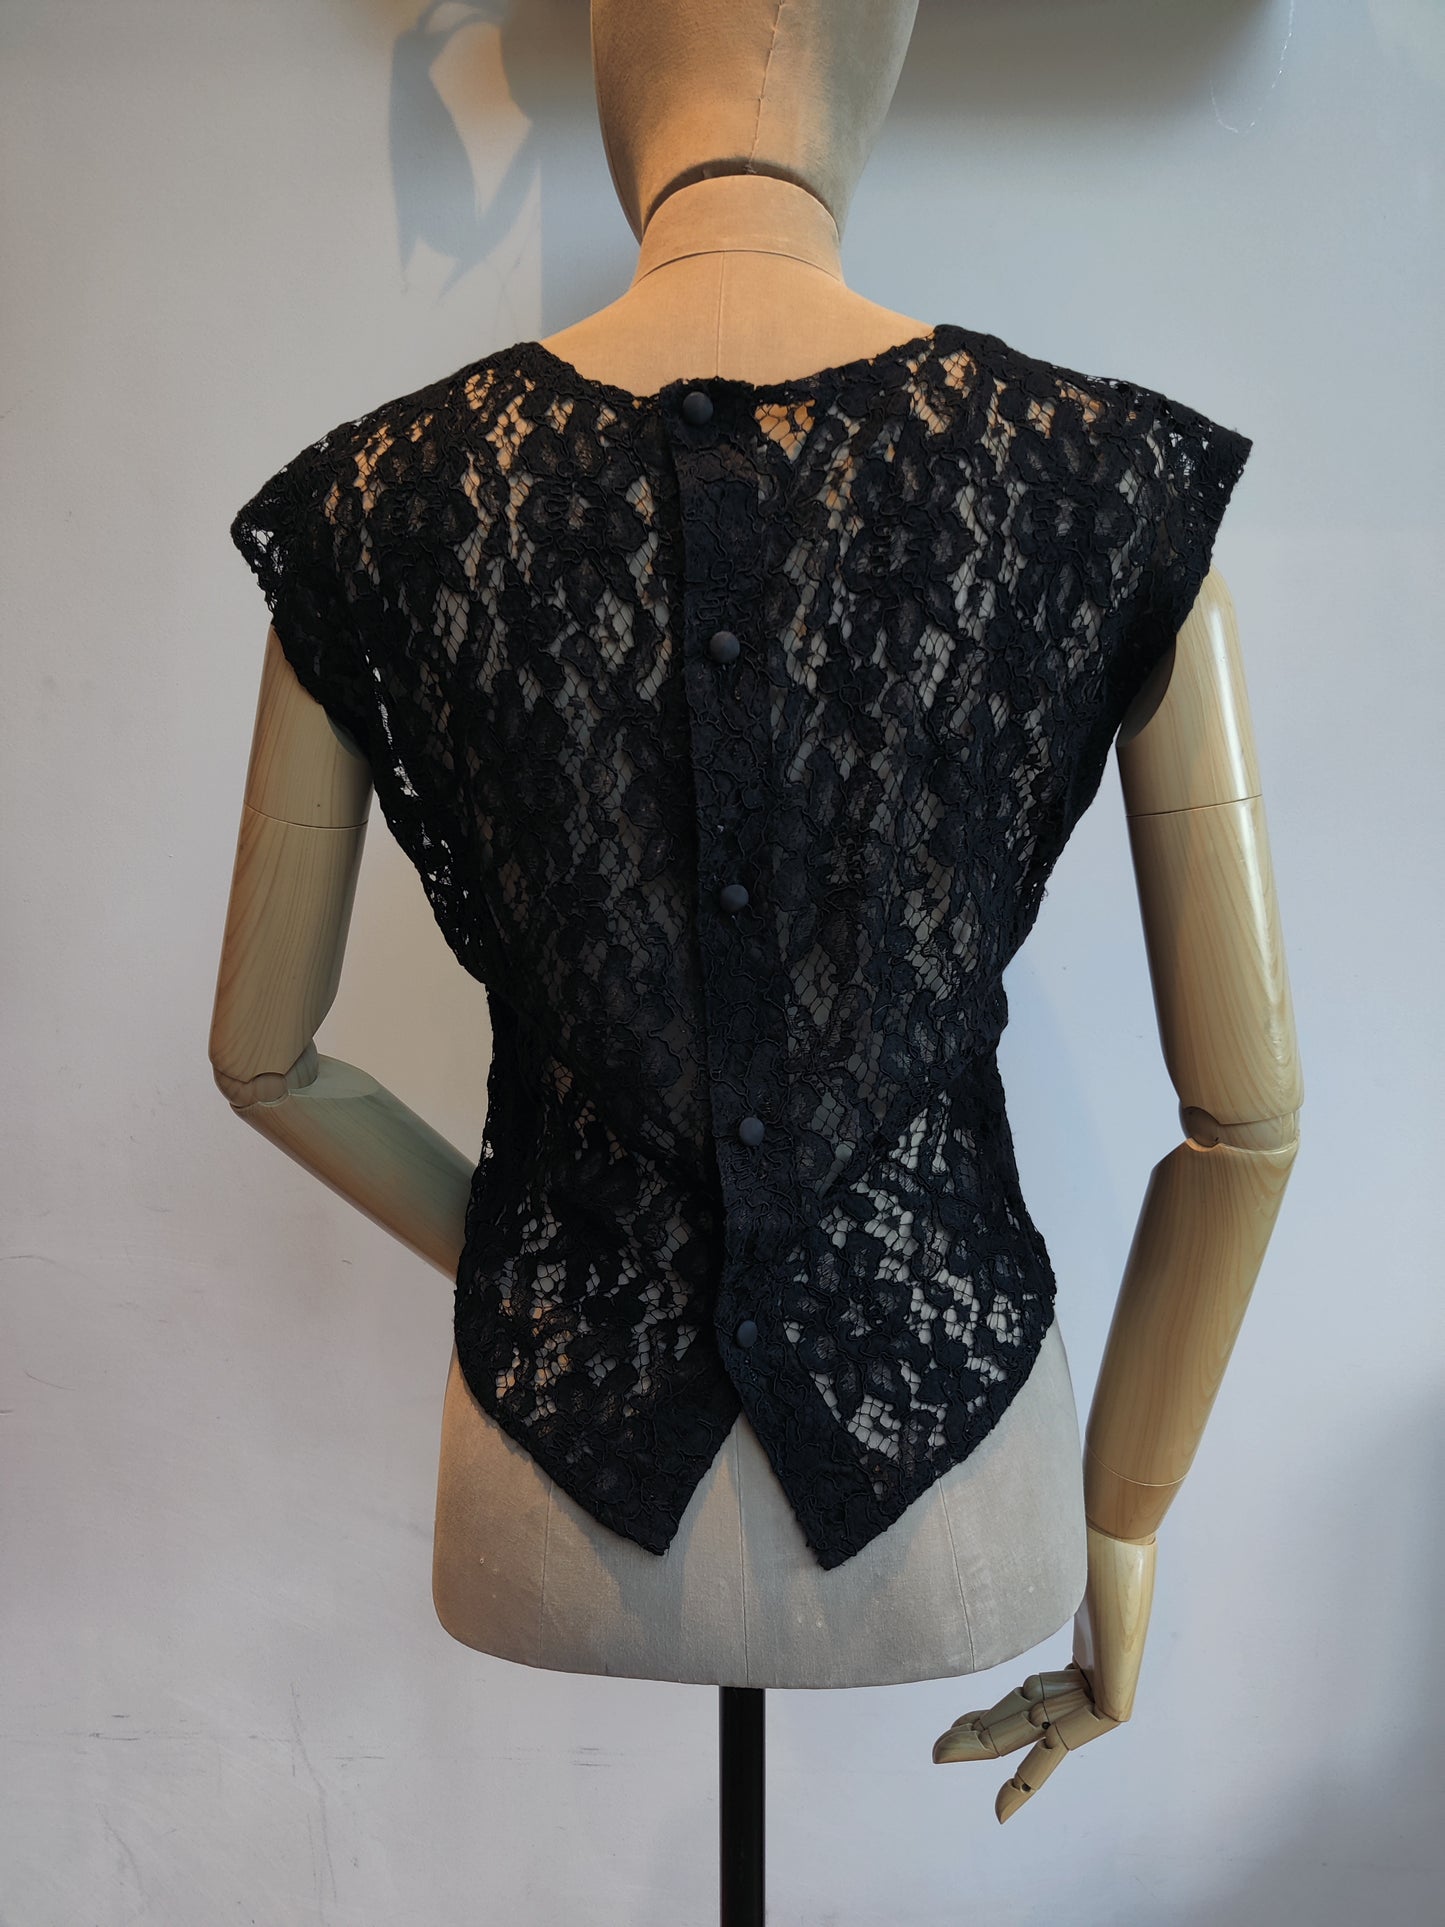 Vintage black lace bodice top with button back.